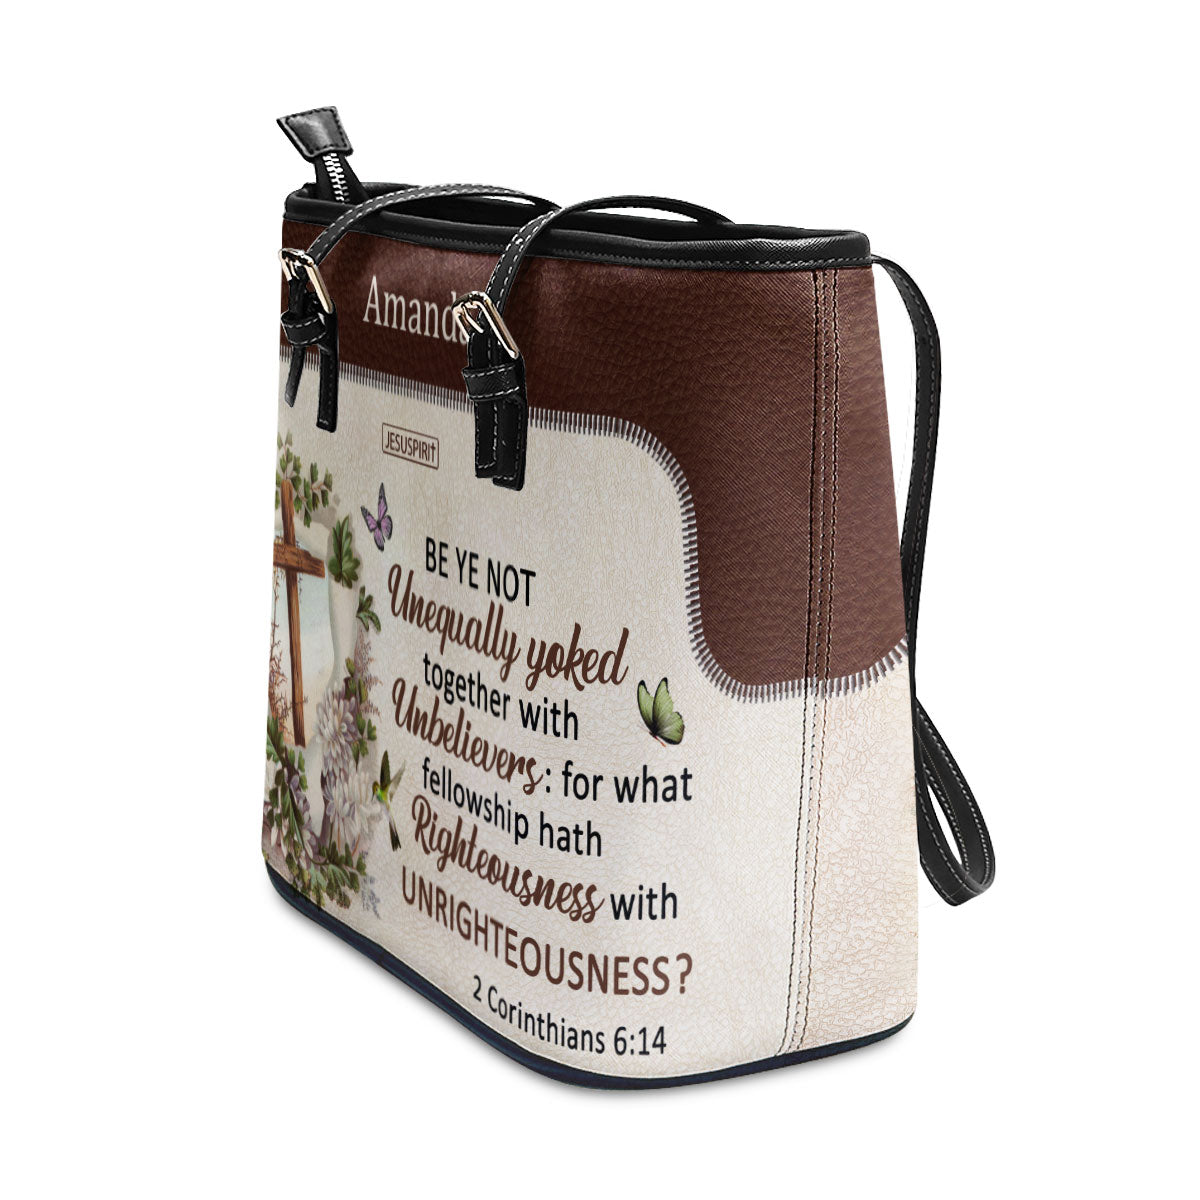 Beautiful Personalized Large Leather Tote Bag - Be Ye Not Unequally Yoked Together With Unbelievers NUM488